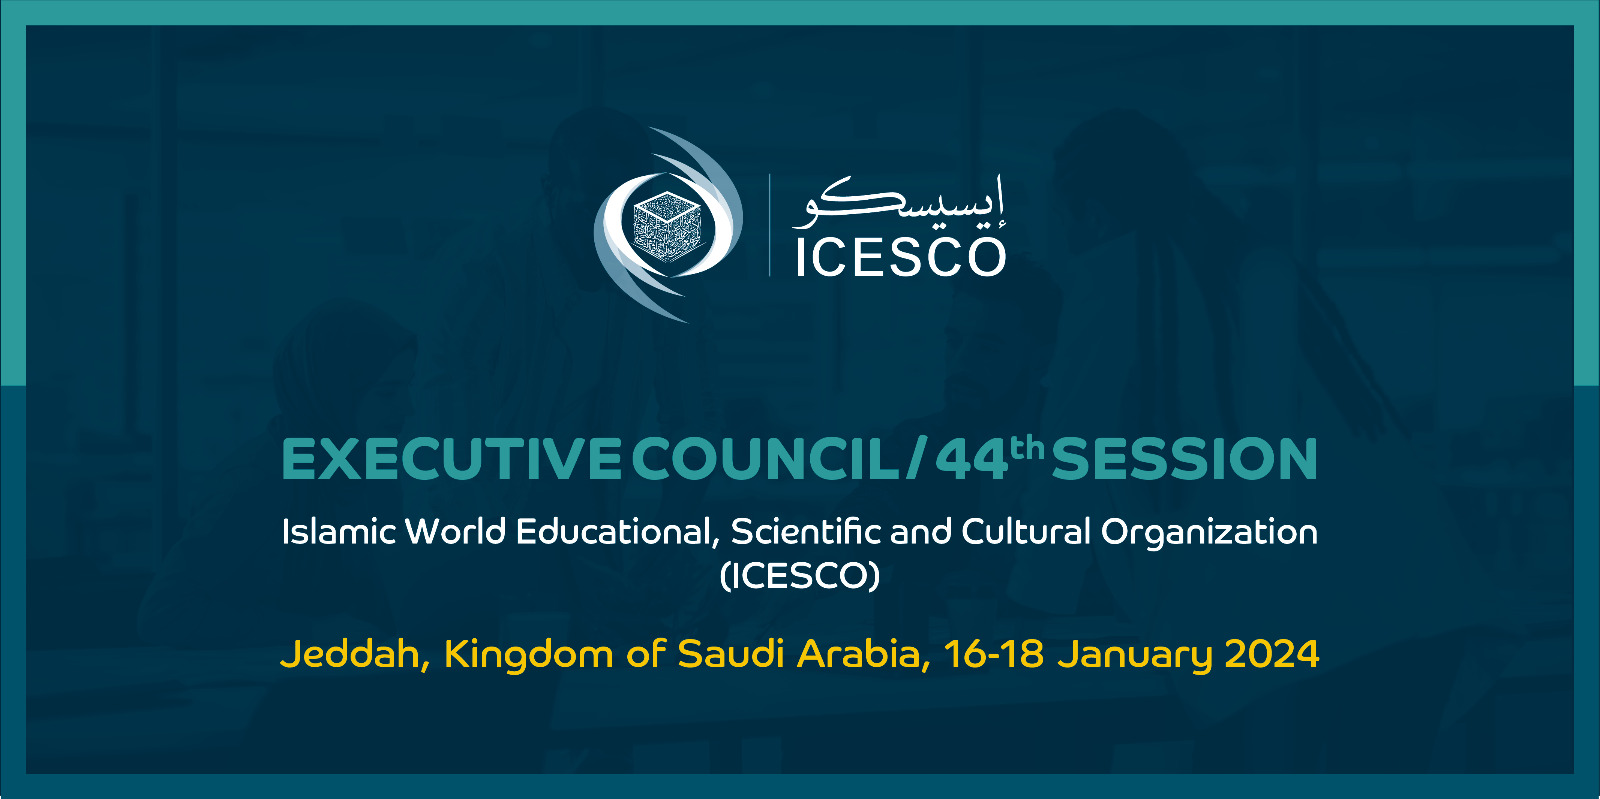 Saudi Arabia to Host the 44th Session of the ICESCO’s Executive Council